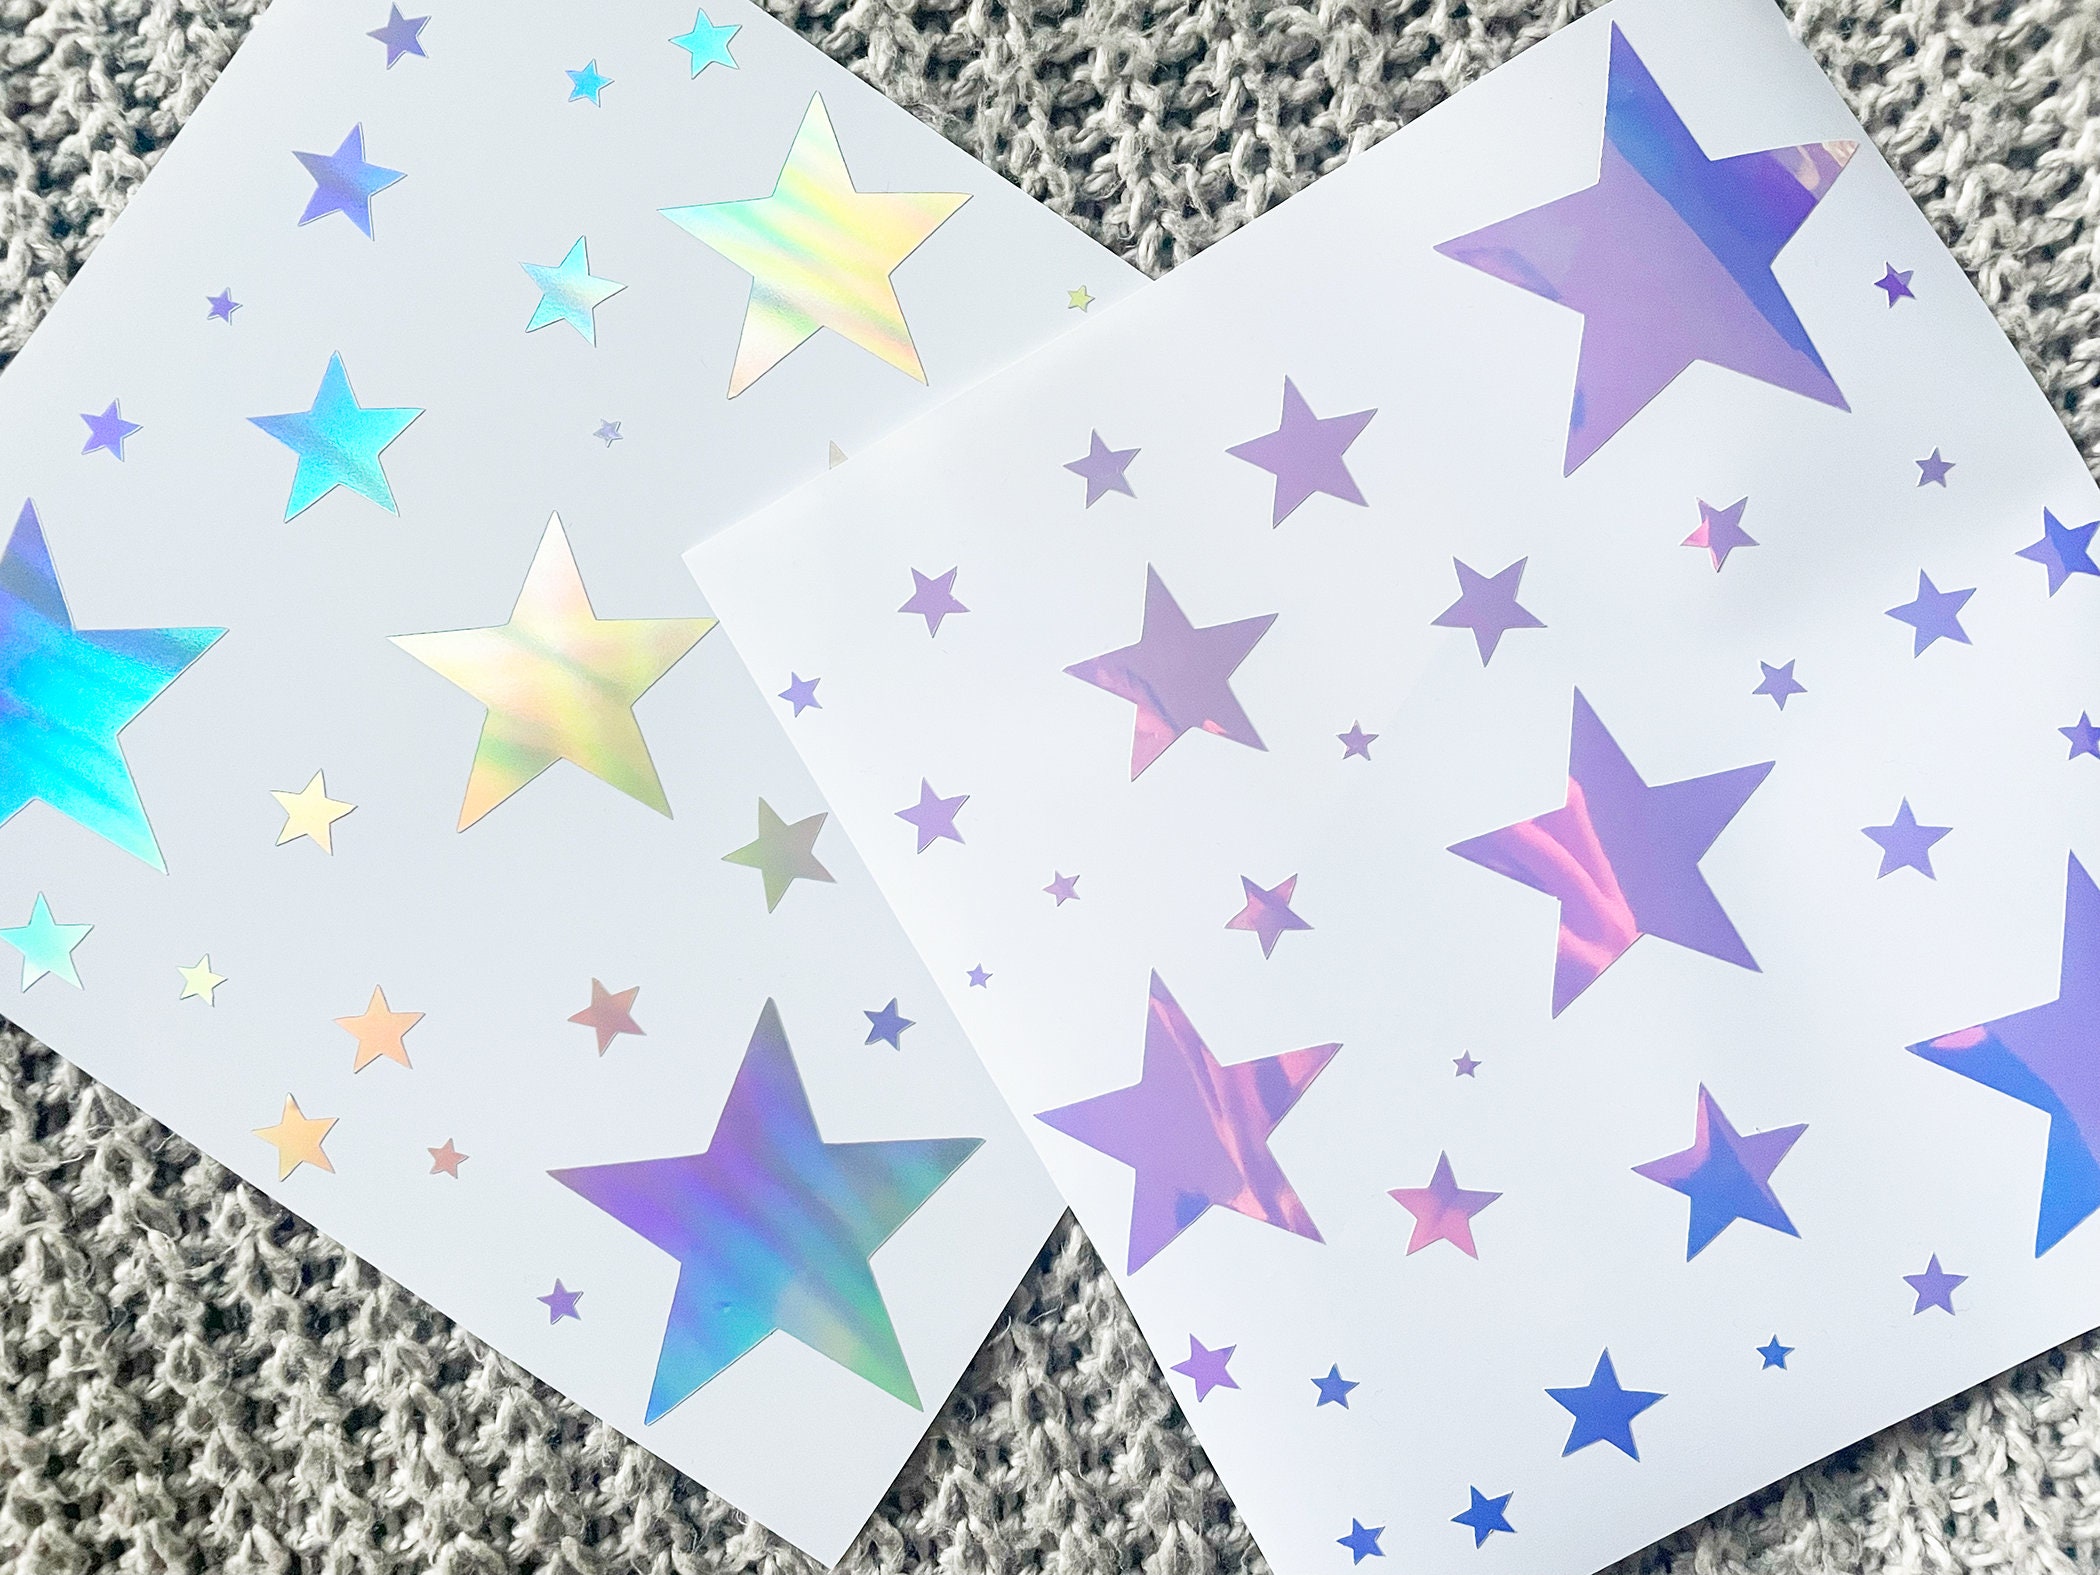 Star Holographic Stickers by Recollections™